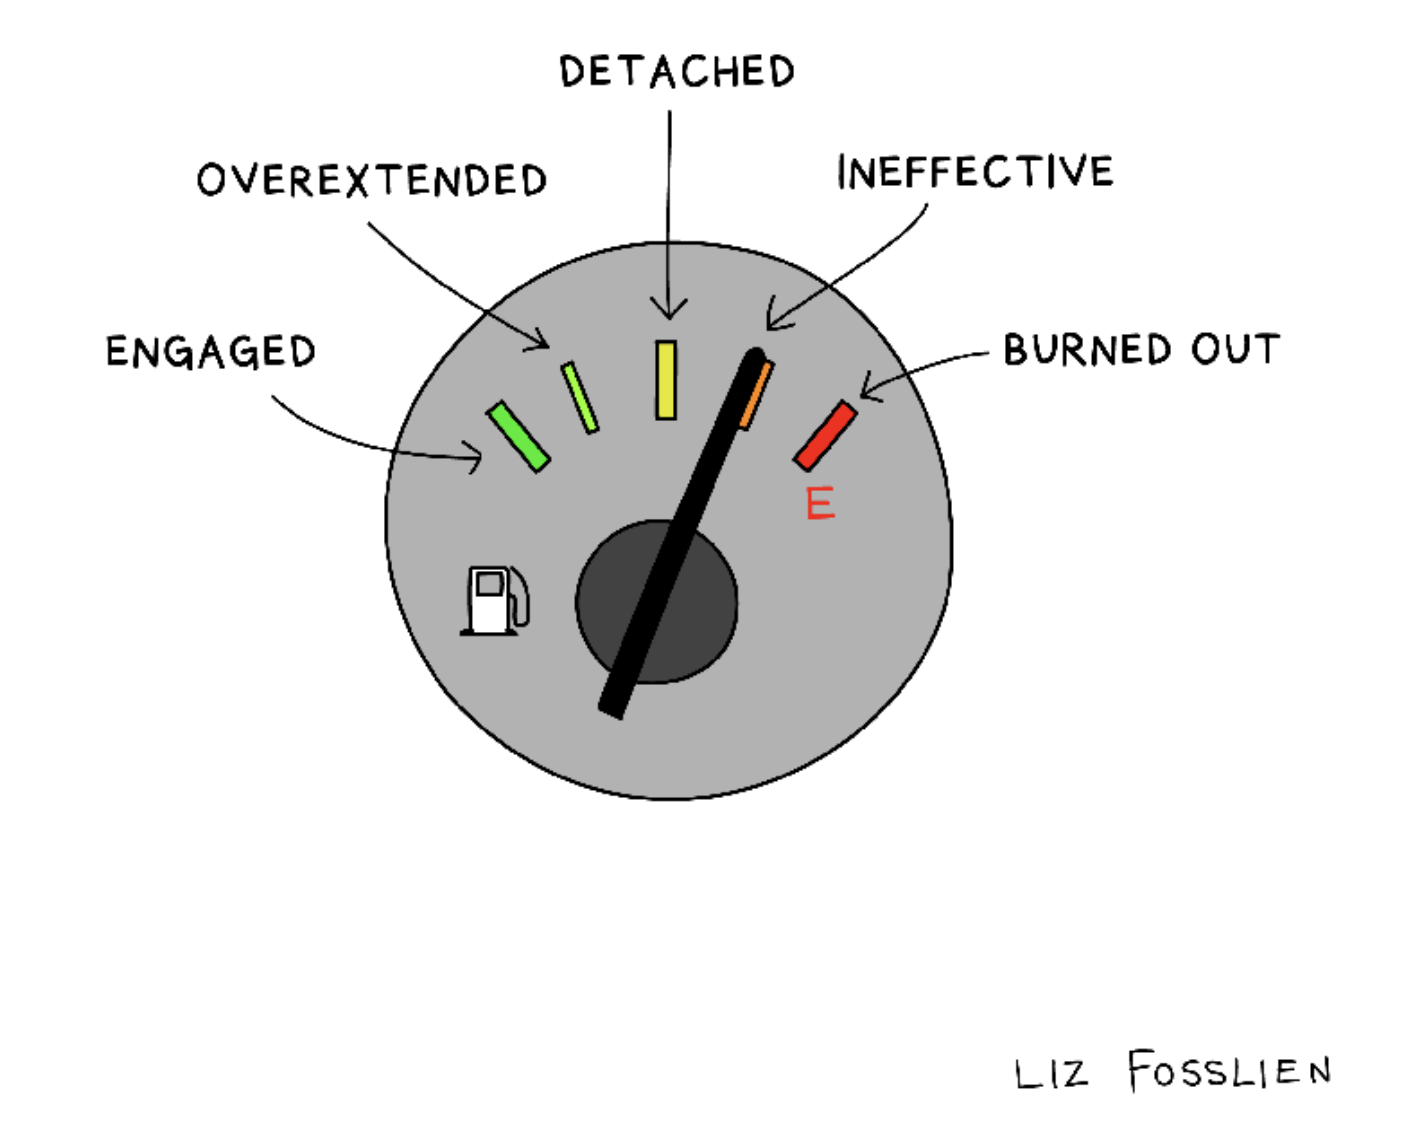 A drawing of a gas gauge that labels a full tank as engaged, partially full tank as overextended, half full tank as detached, almost empty as ineffective and empty as burned out.